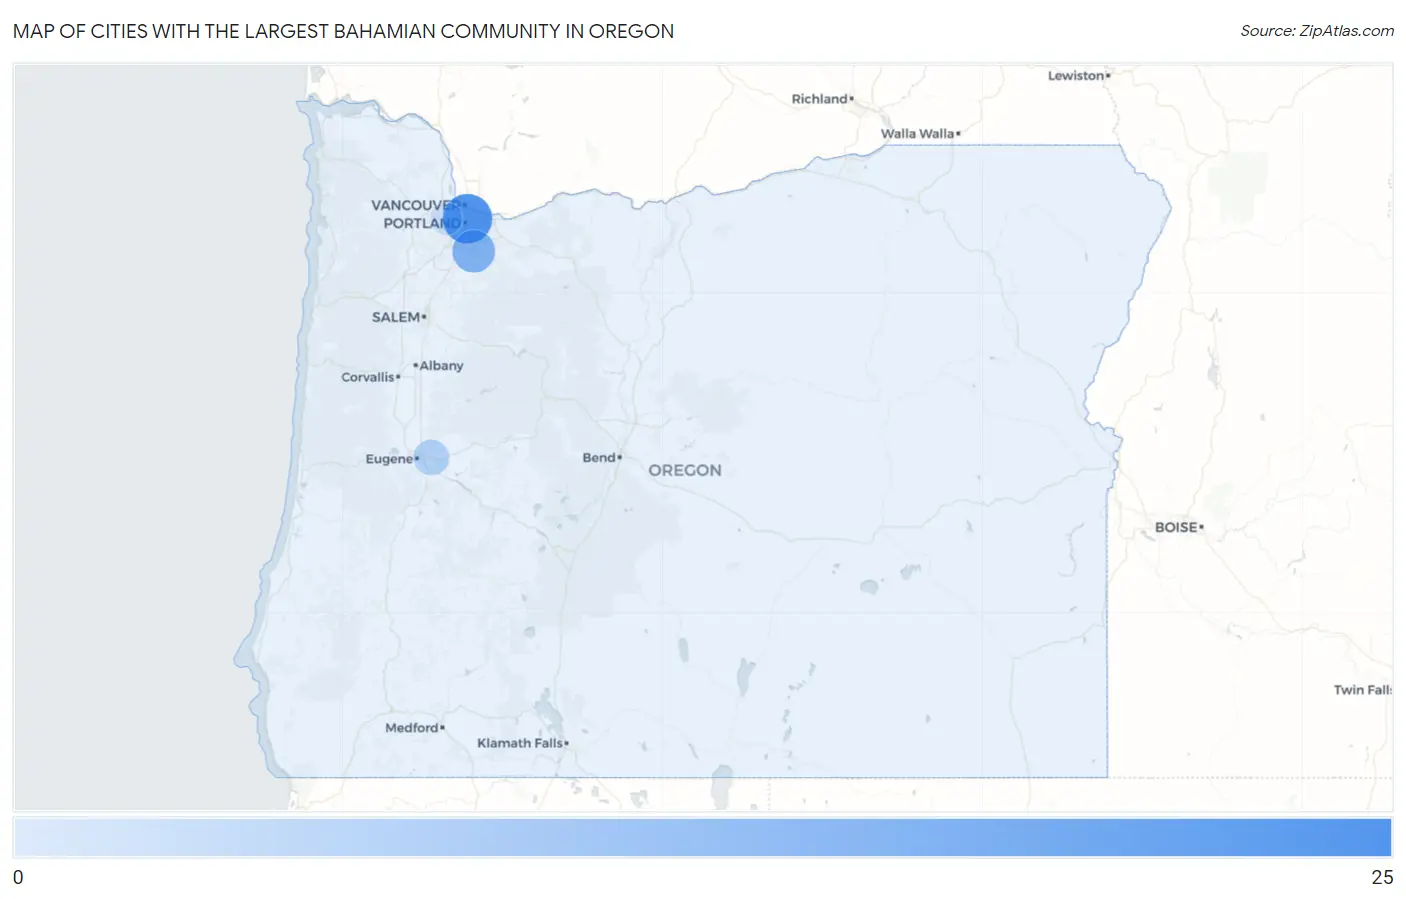 Cities with the Largest Bahamian Community in Oregon Map